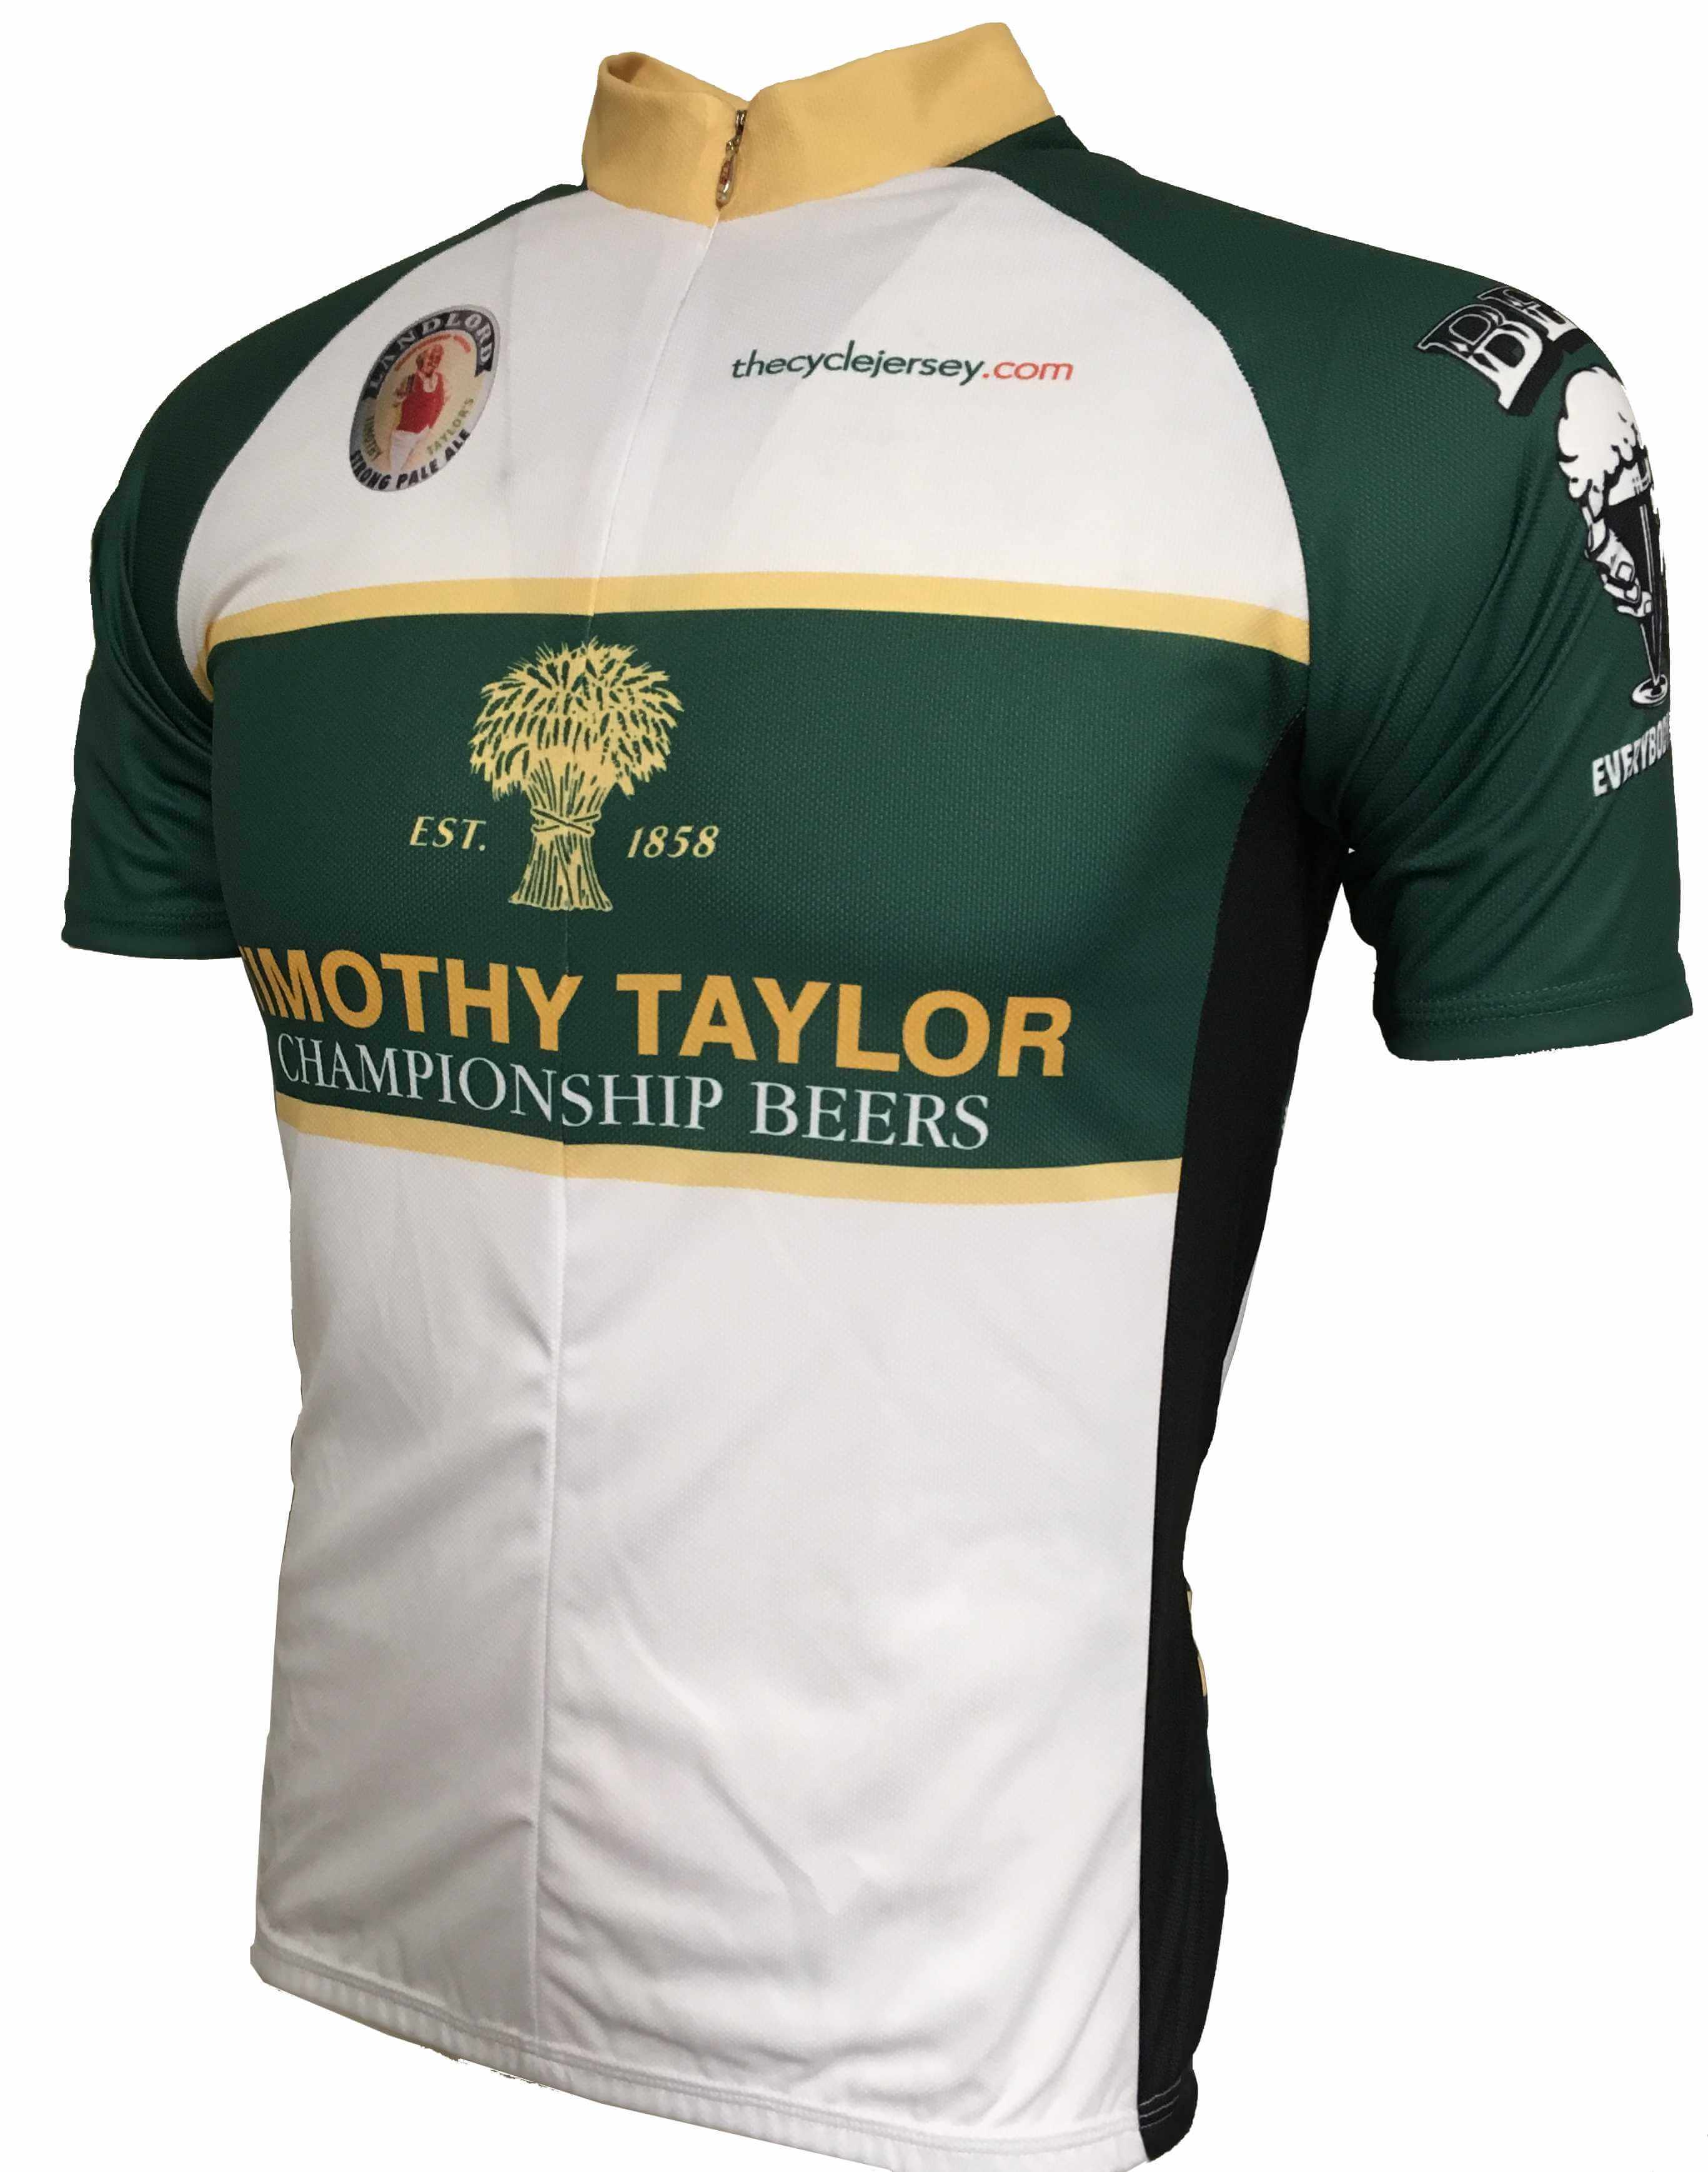 timothy taylor cycling jersey